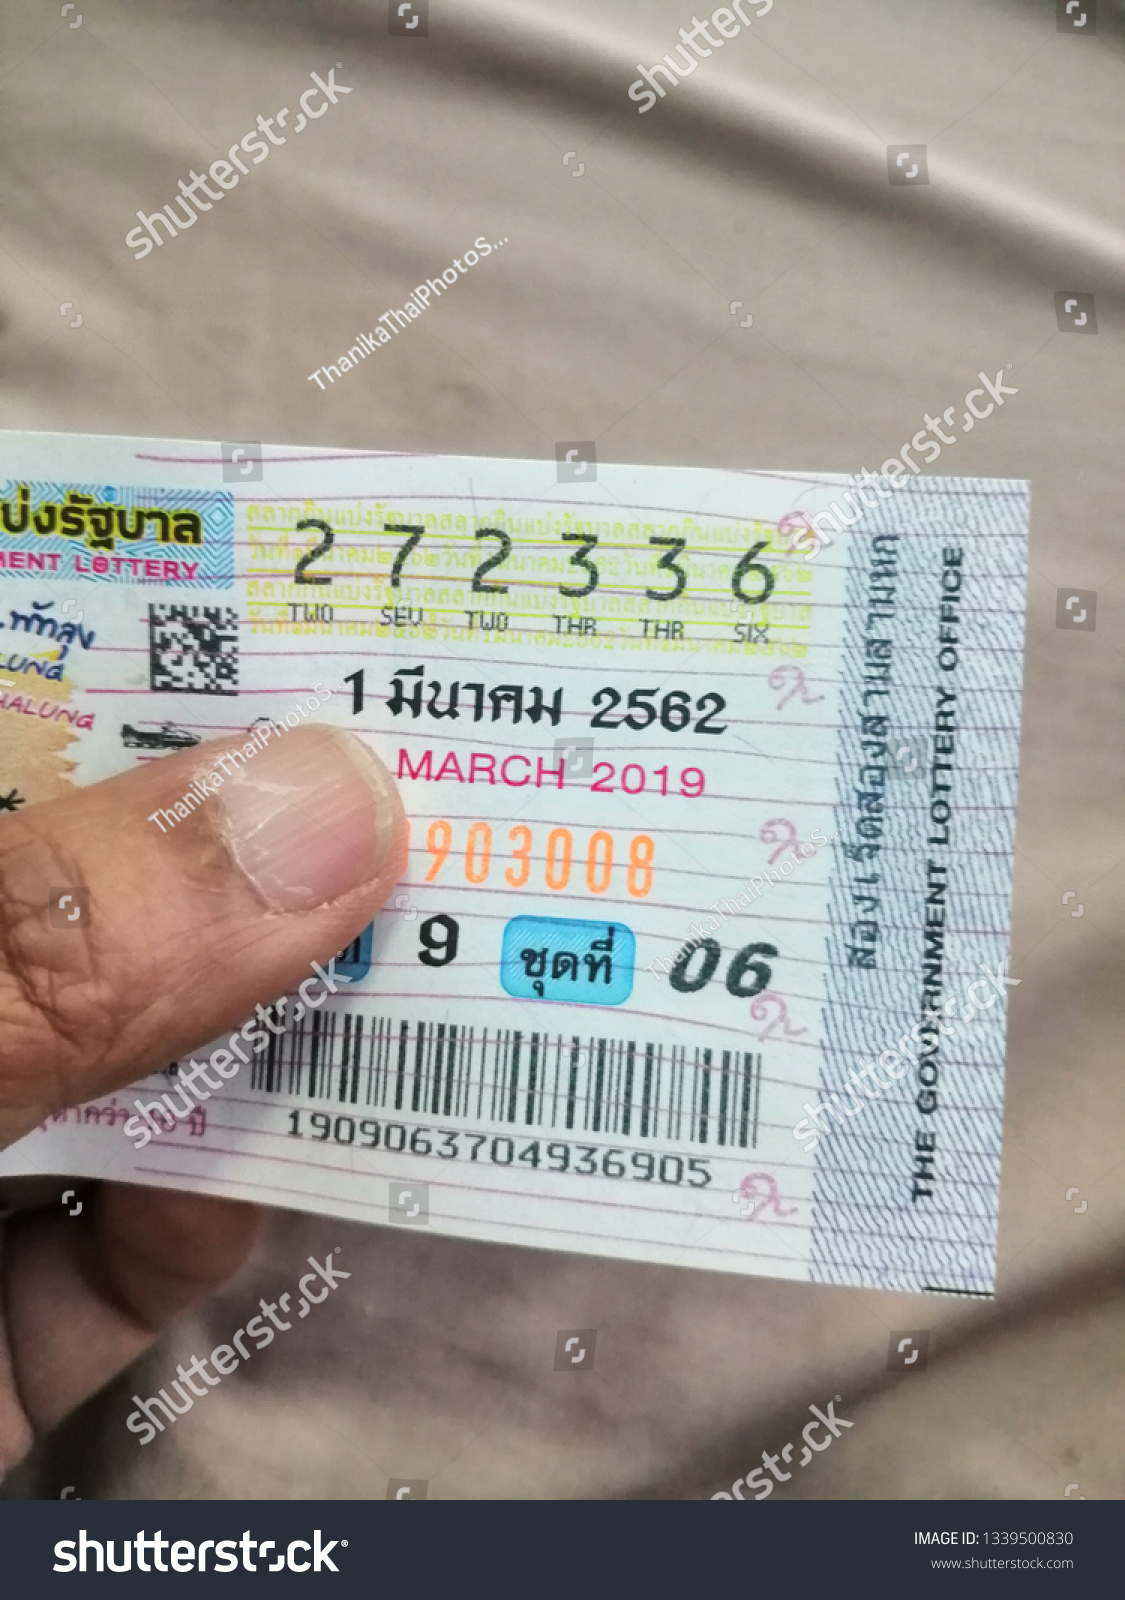 result lotto march 9 2019